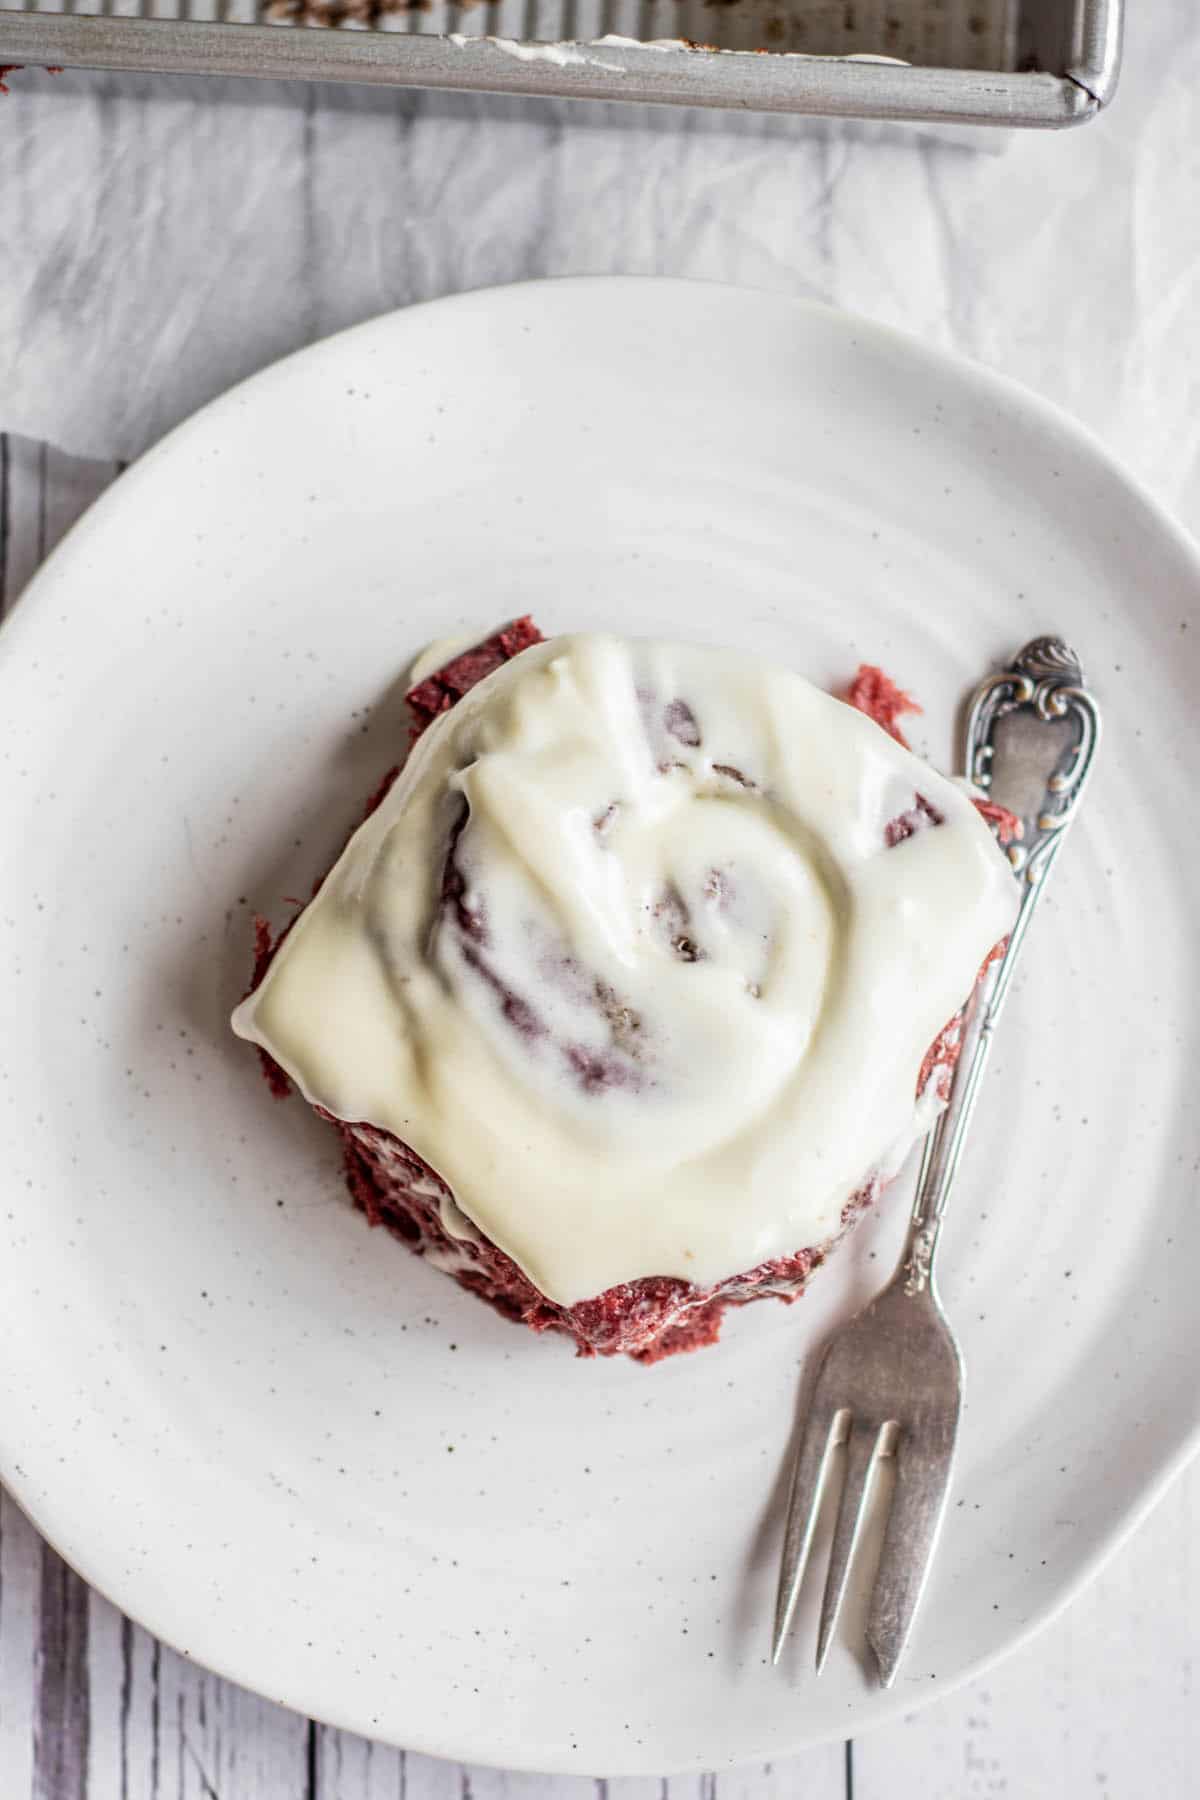 birds eye  view of a red velvet cinnamon roll recipe with cream cheese frosting on a plate.